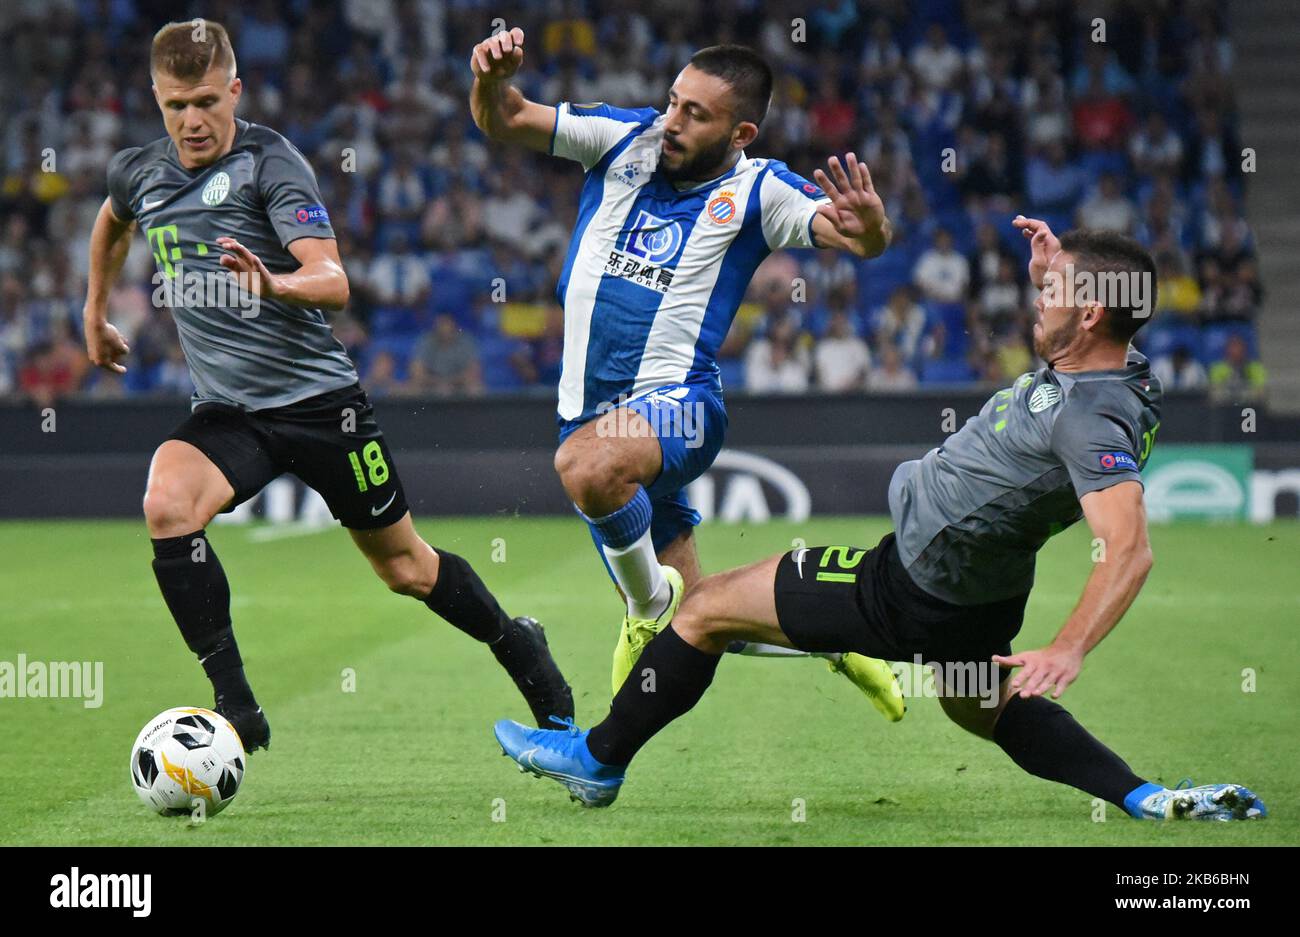 Matias Vargas, David Siger and Endre Botka during the match between RCD Espanyol and Ferencvaros, corresponding to the round 1 of the group stage of the Group H of the UEFA Europa League, played at the RCDESPANYOL Stadium, on 20th September 2019, in Barcelona, Spain. (Photo by Noelia Deniz/Urbanandsport /NurPhoto) Stock Photo